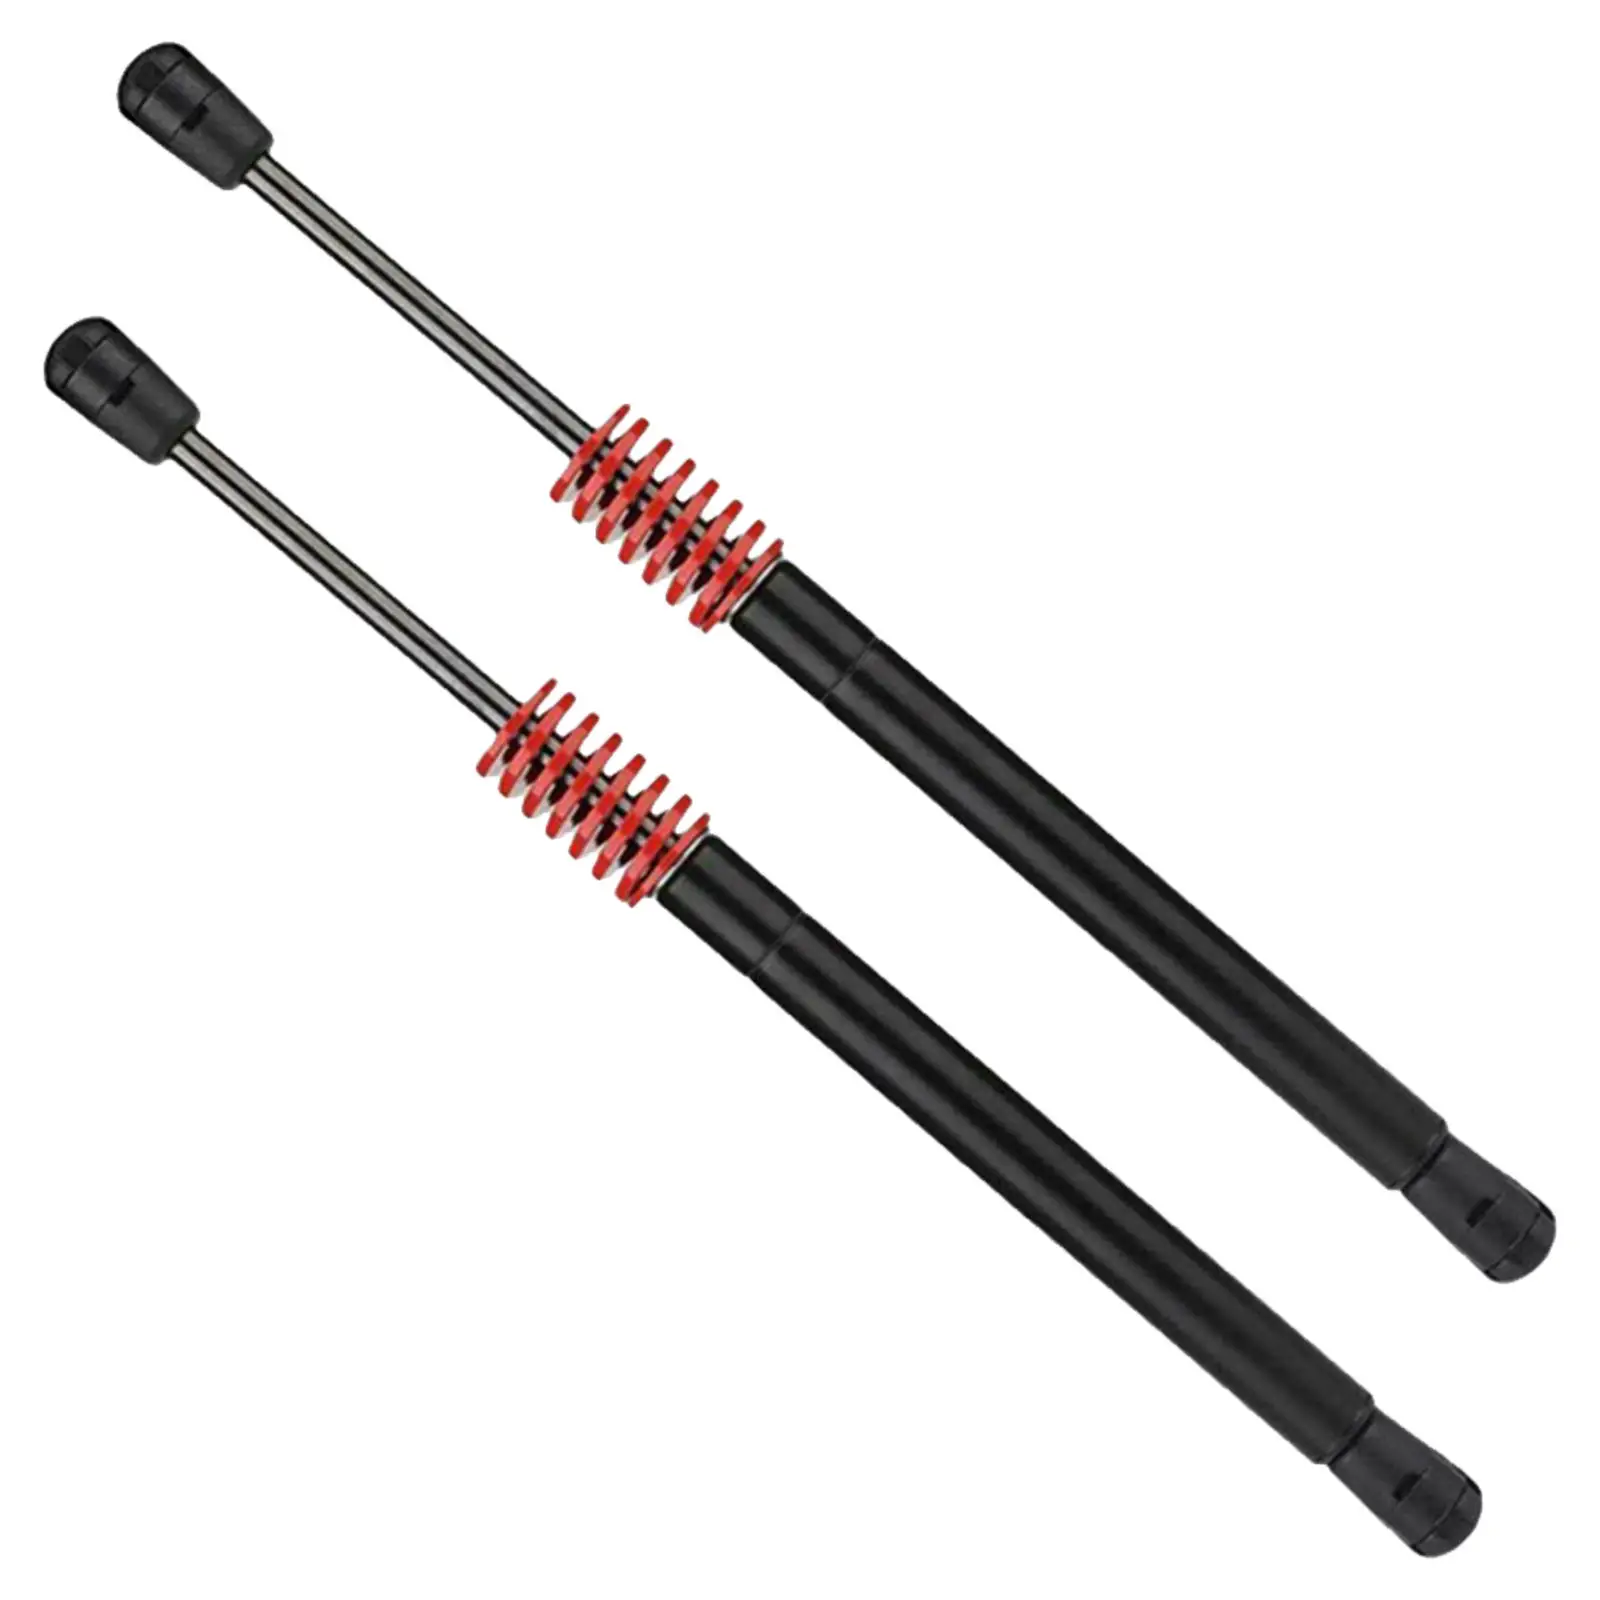 2Pcs with Spring Steel Automatic Trunk Lift Struts Fits for Tesla Model 3 Accessories Durable Professional Replacement